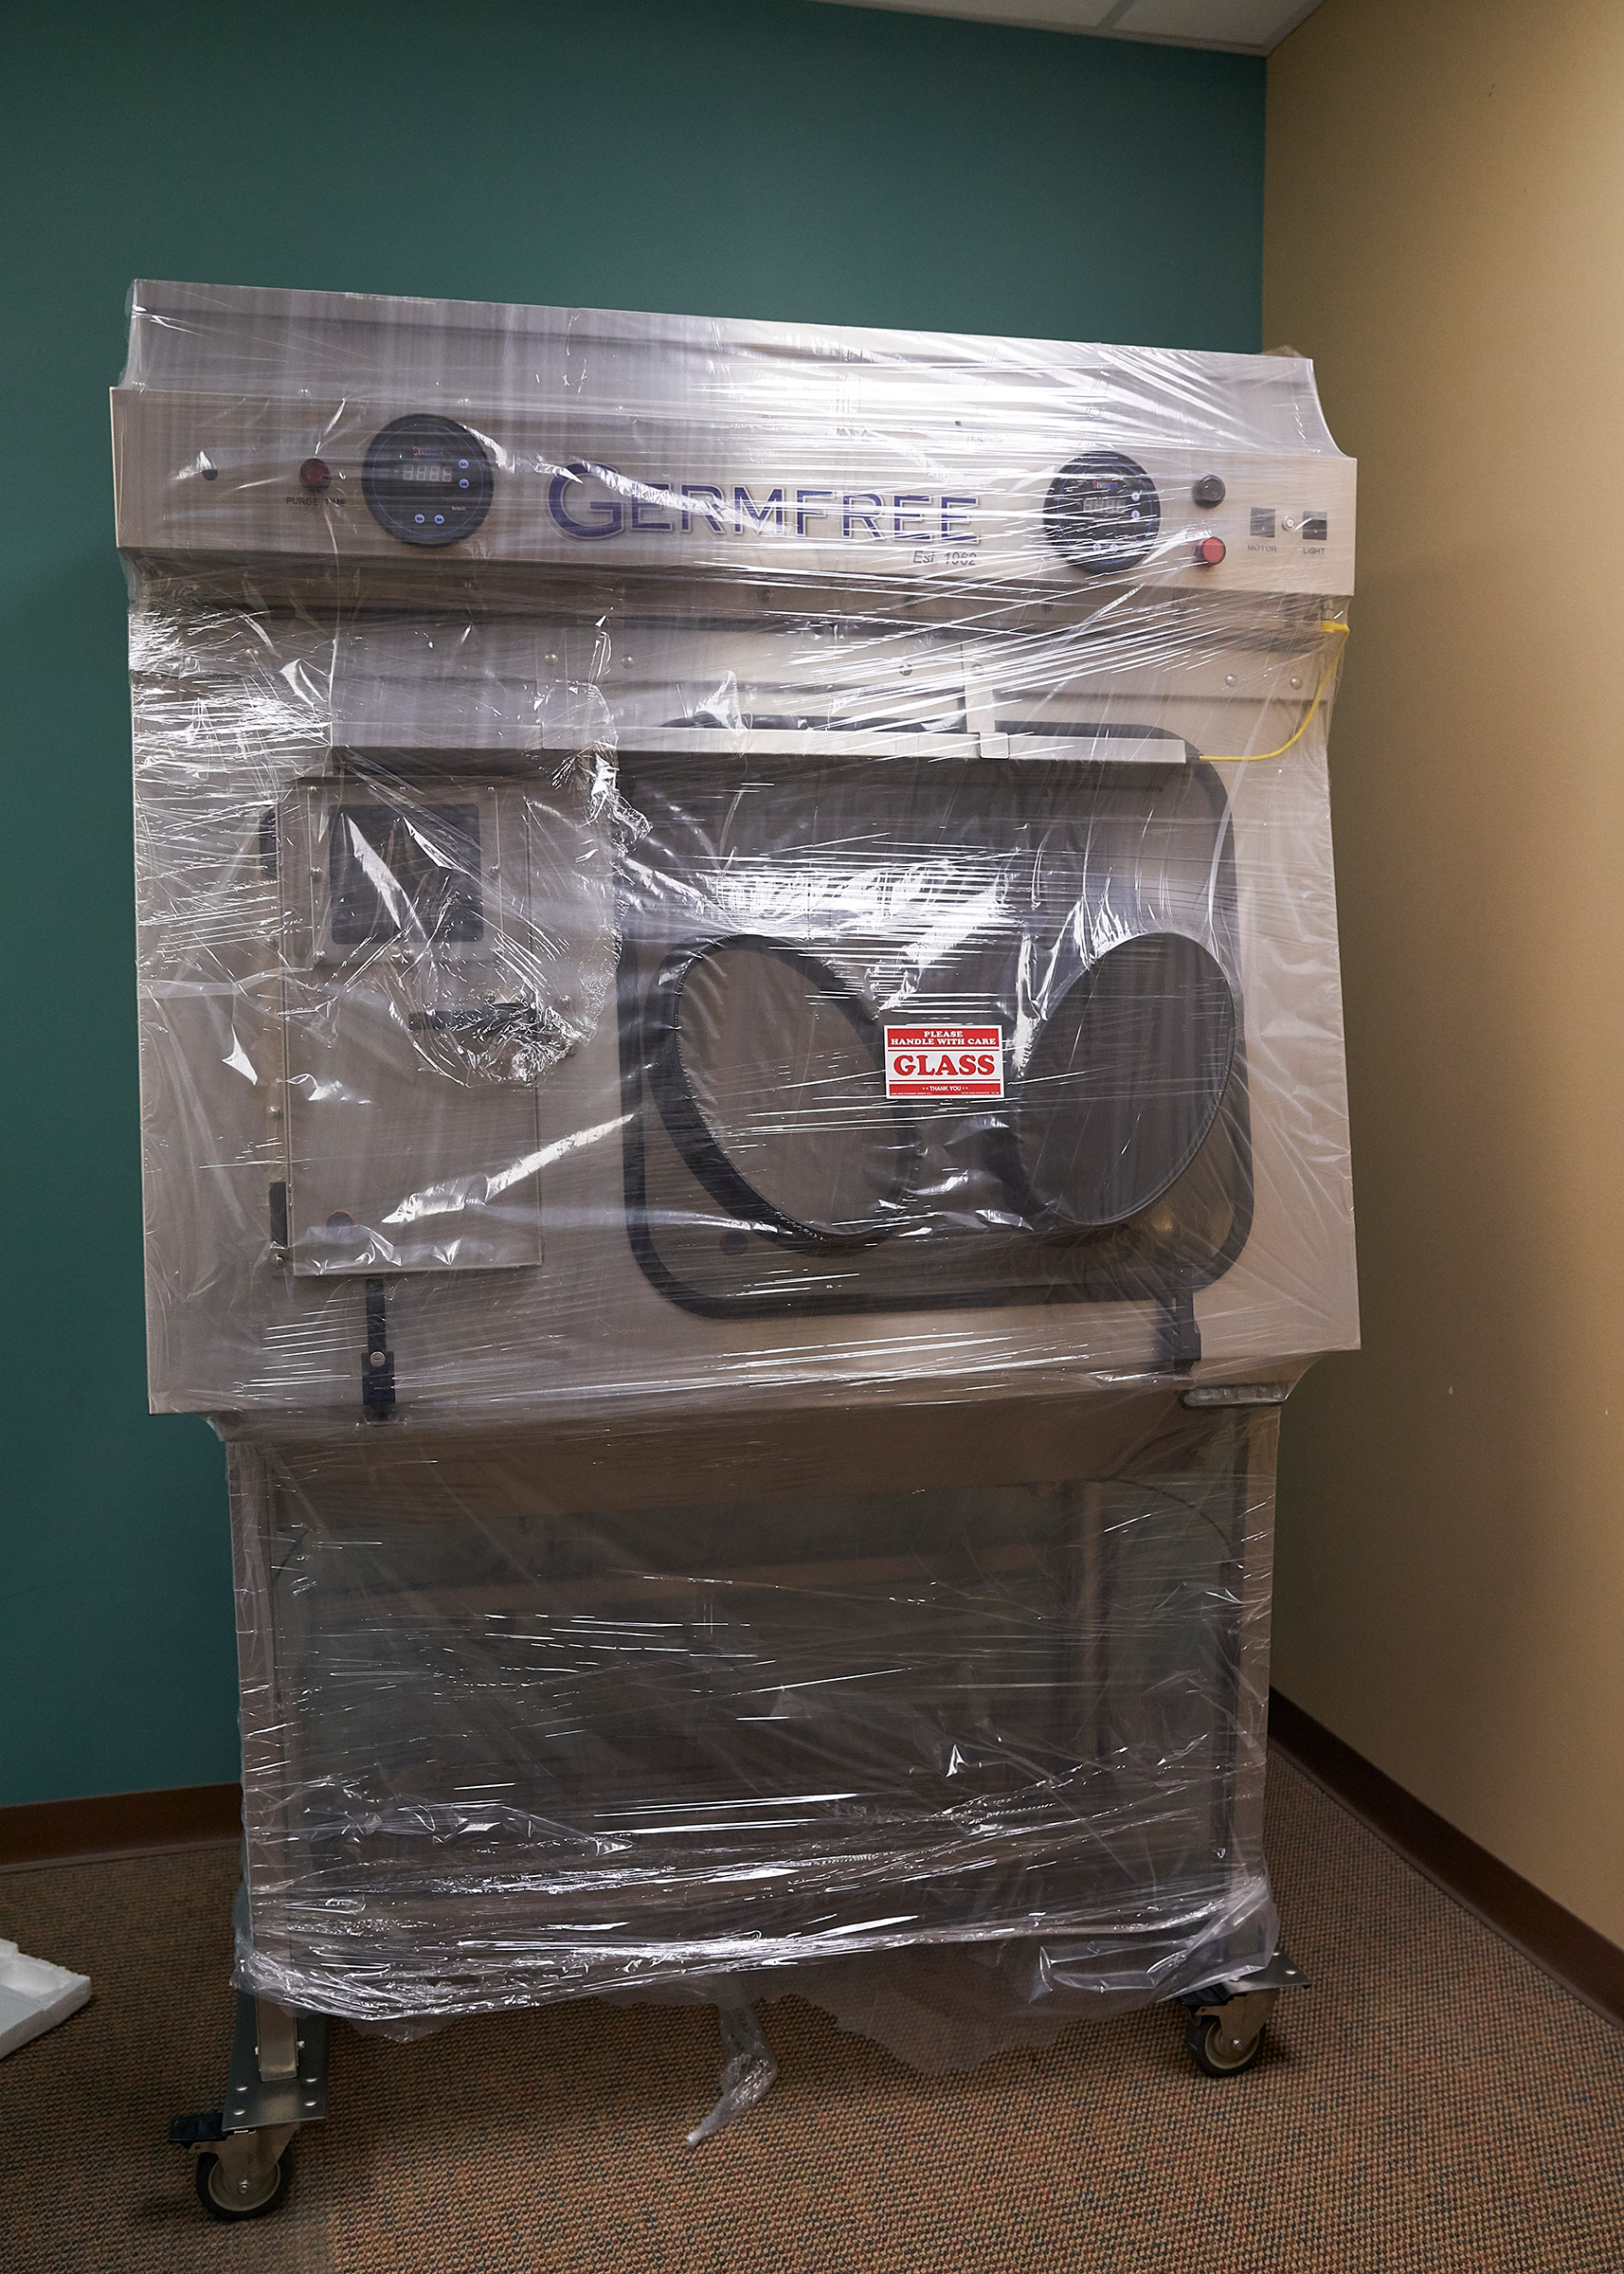 Newly purchased pharmaceutical hood used to mix medications for Clinch Memorial Hospital.